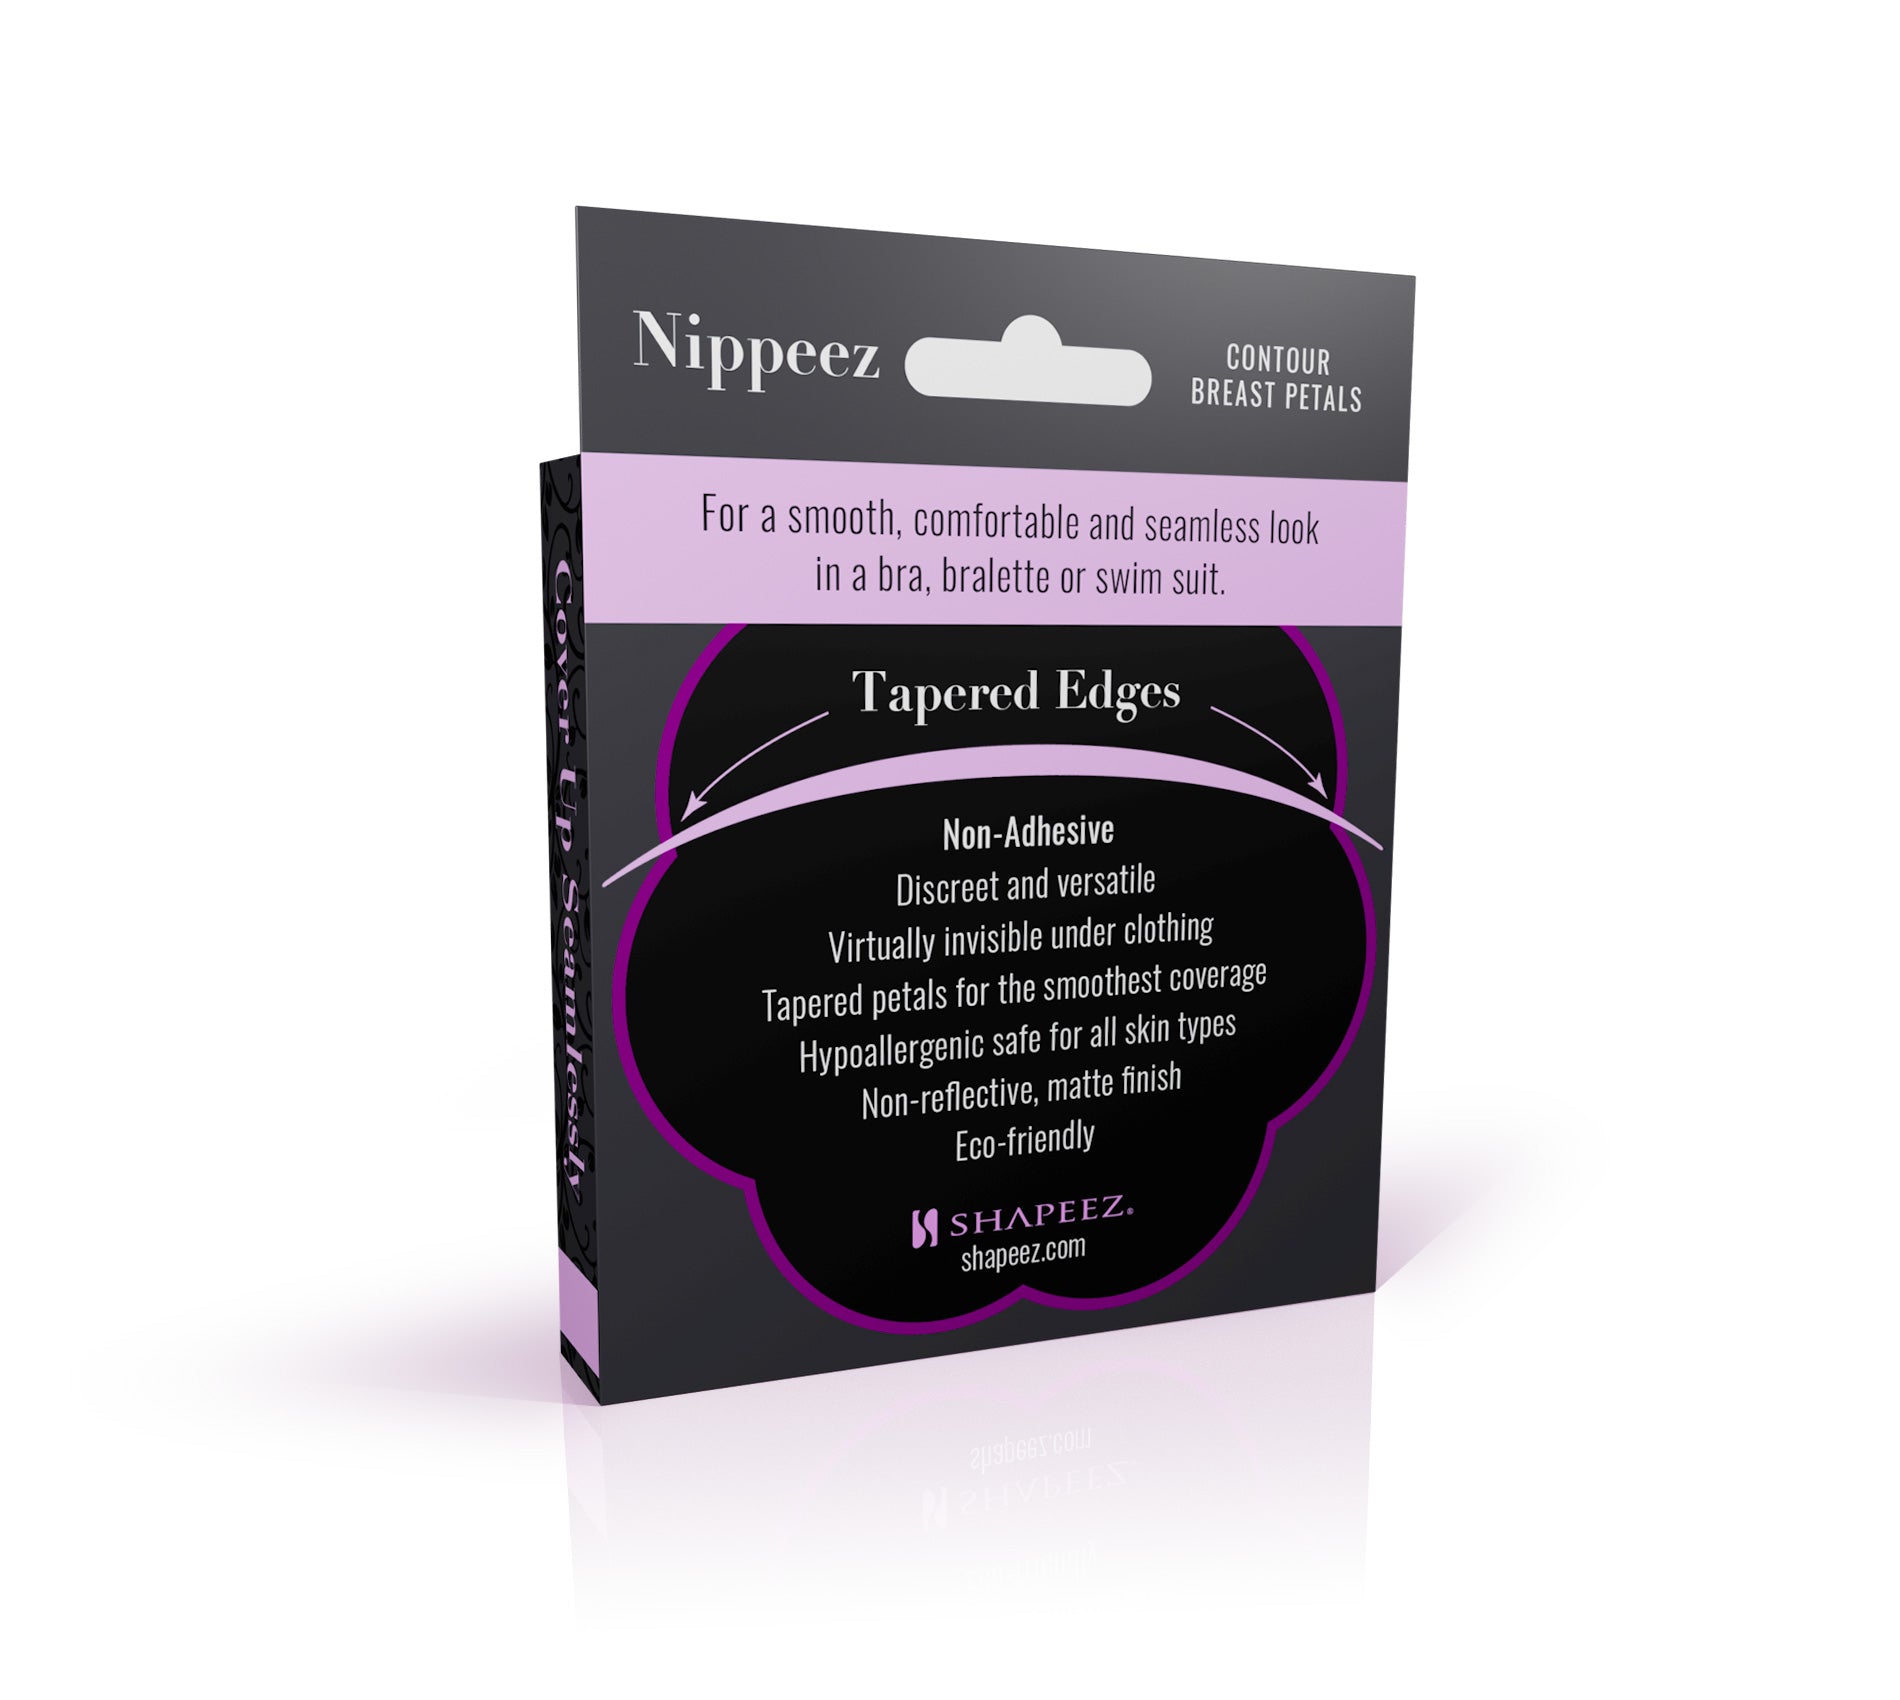 Adhesive Petal-shaped Nipple Covers. Conceals nipples while